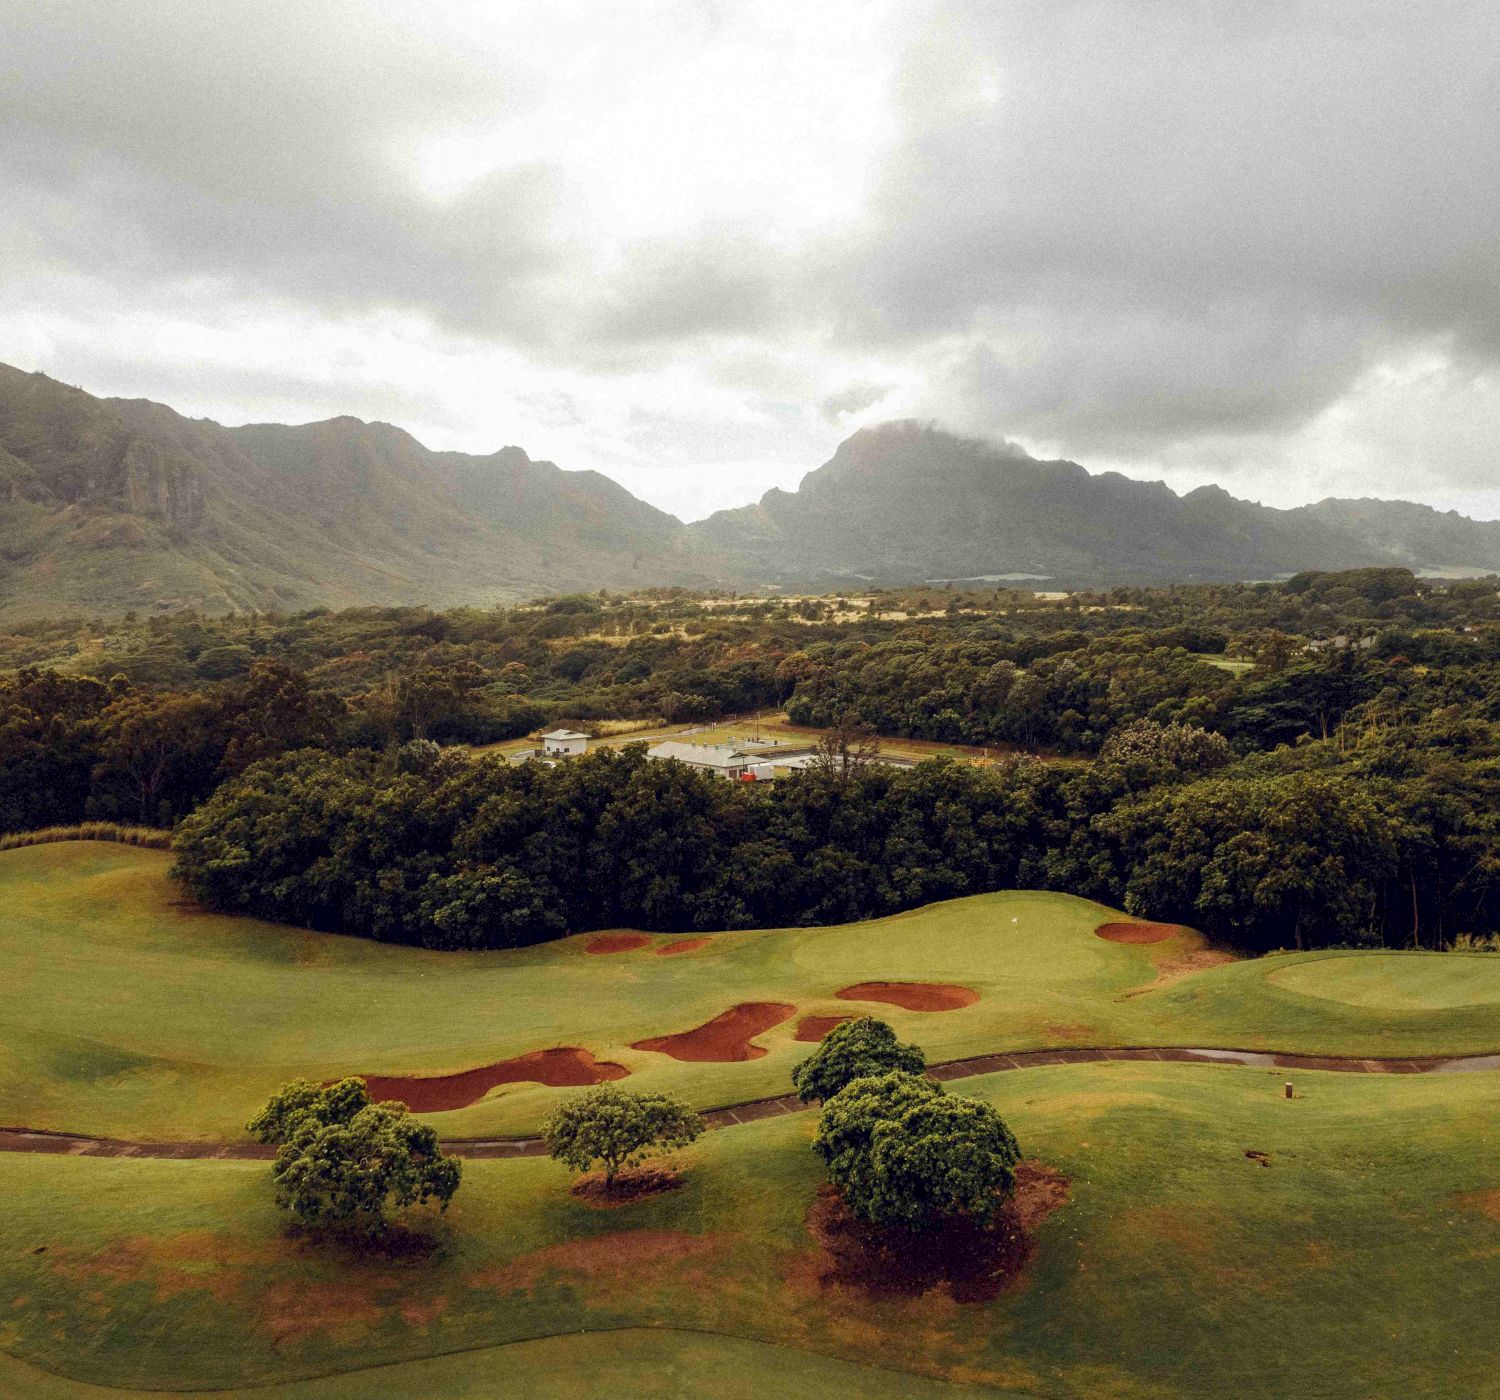 A scenic view of a golf course with lush greenery, trees, distant mountains, and a cloudy sky in the background.